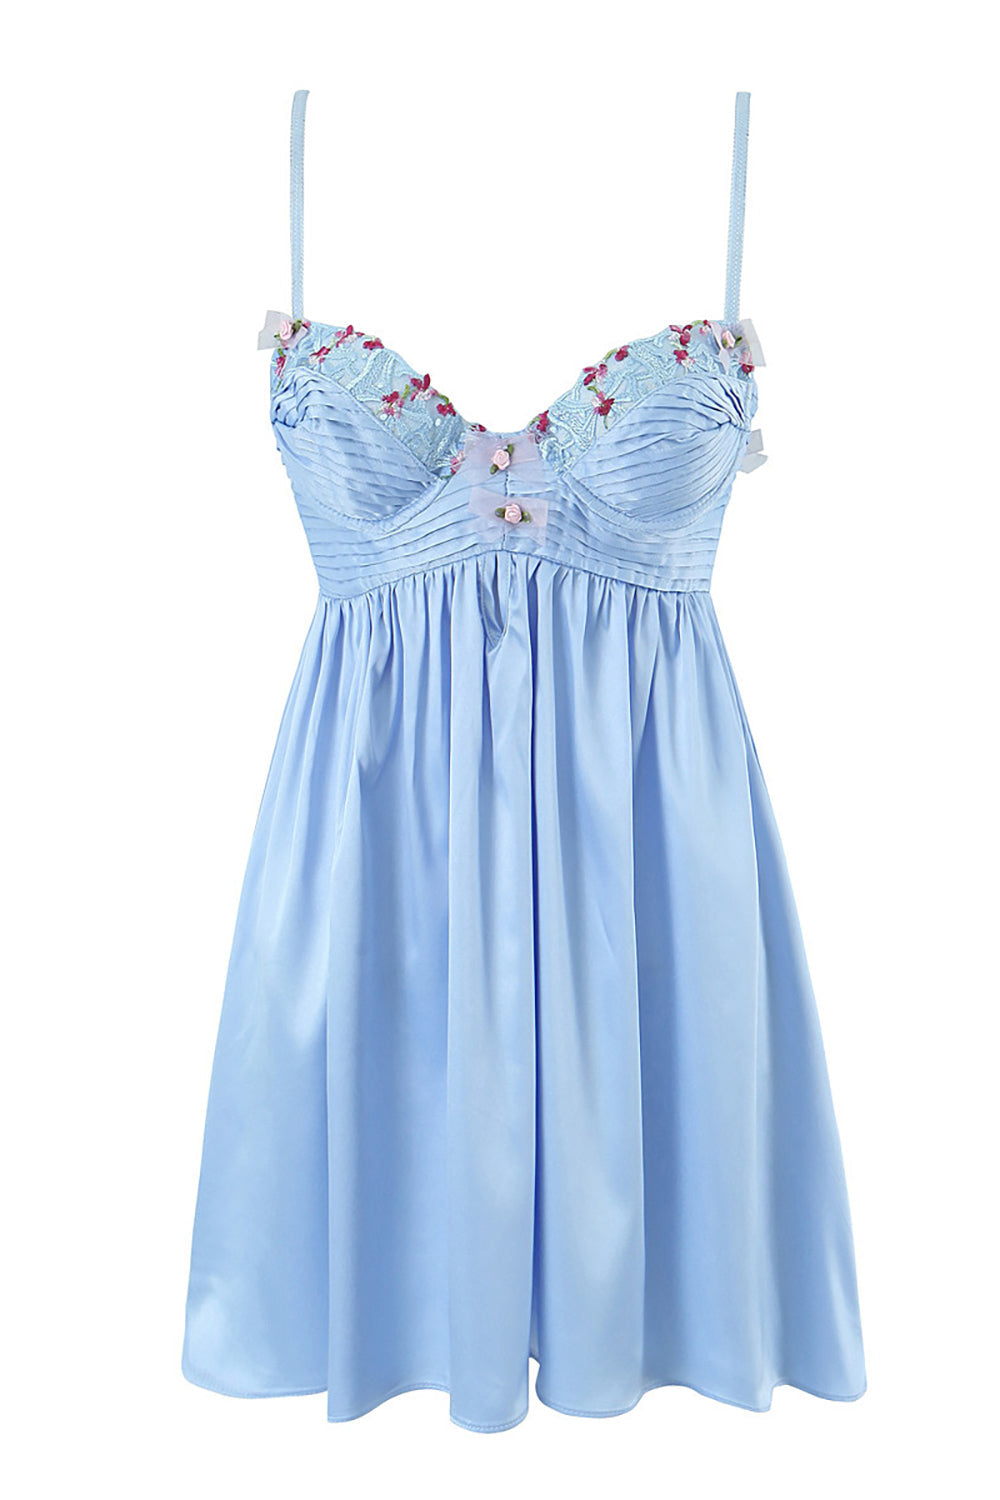 Blue A-Line Spaghetti Straps Backless Graduation Dress With Appliques